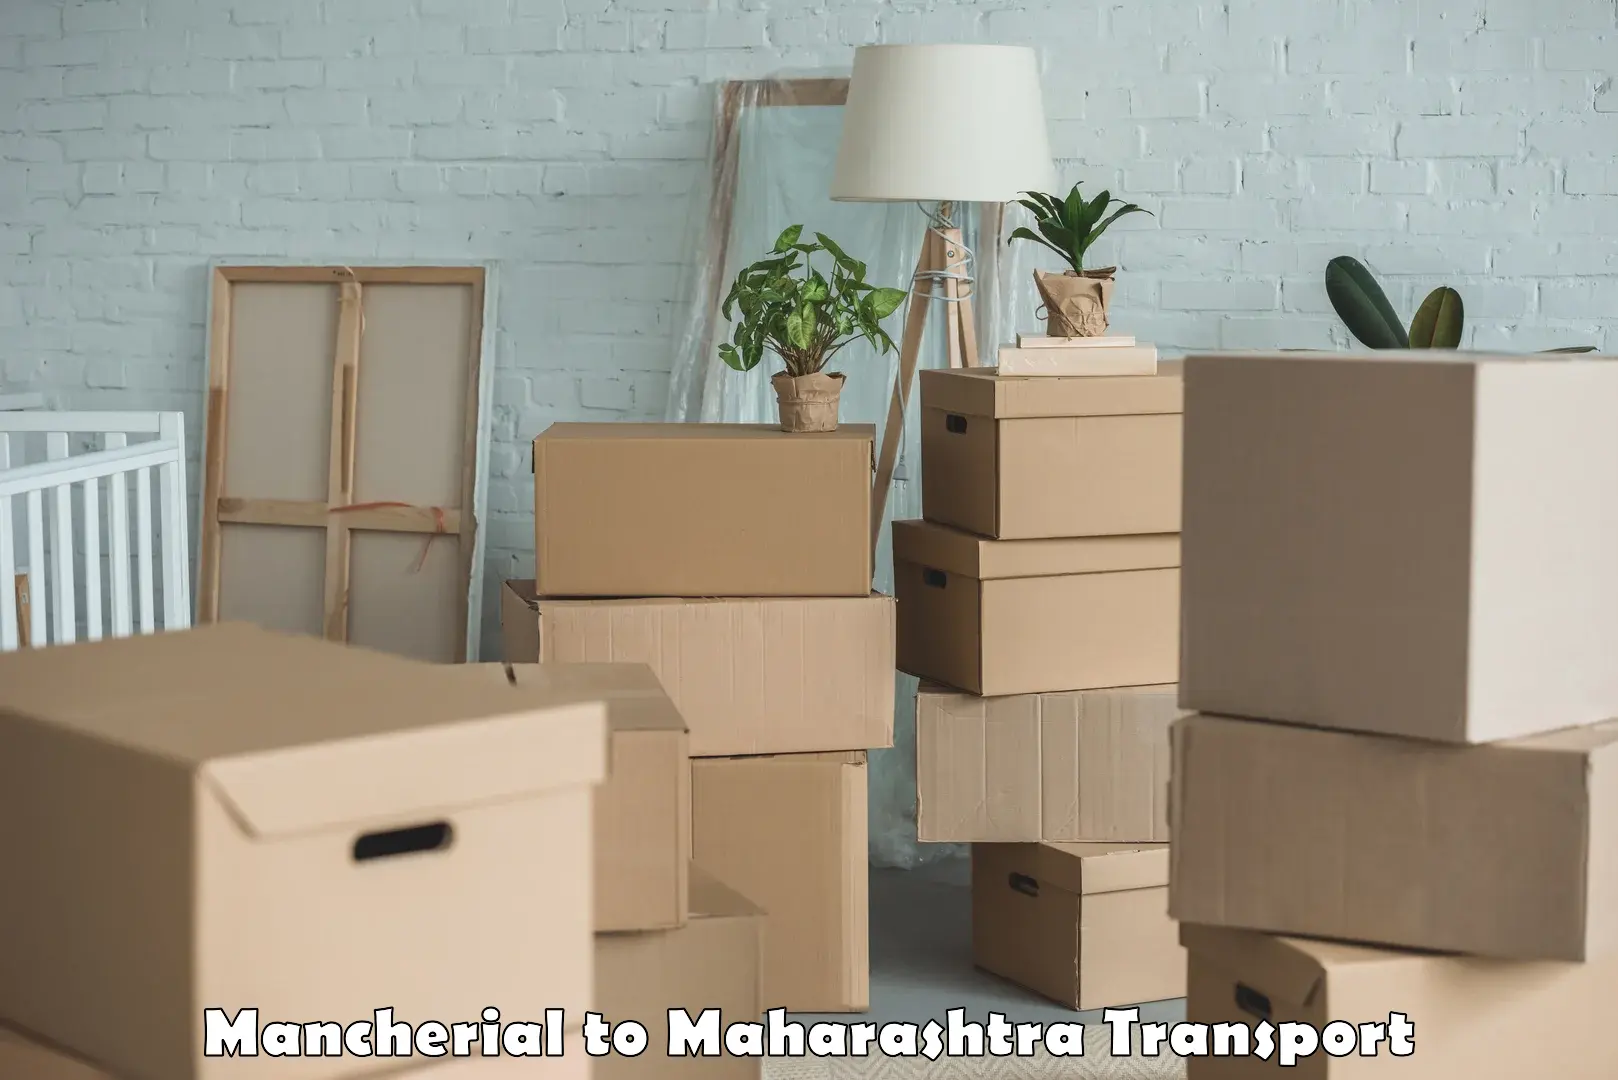 Express transport services in Mancherial to Pune